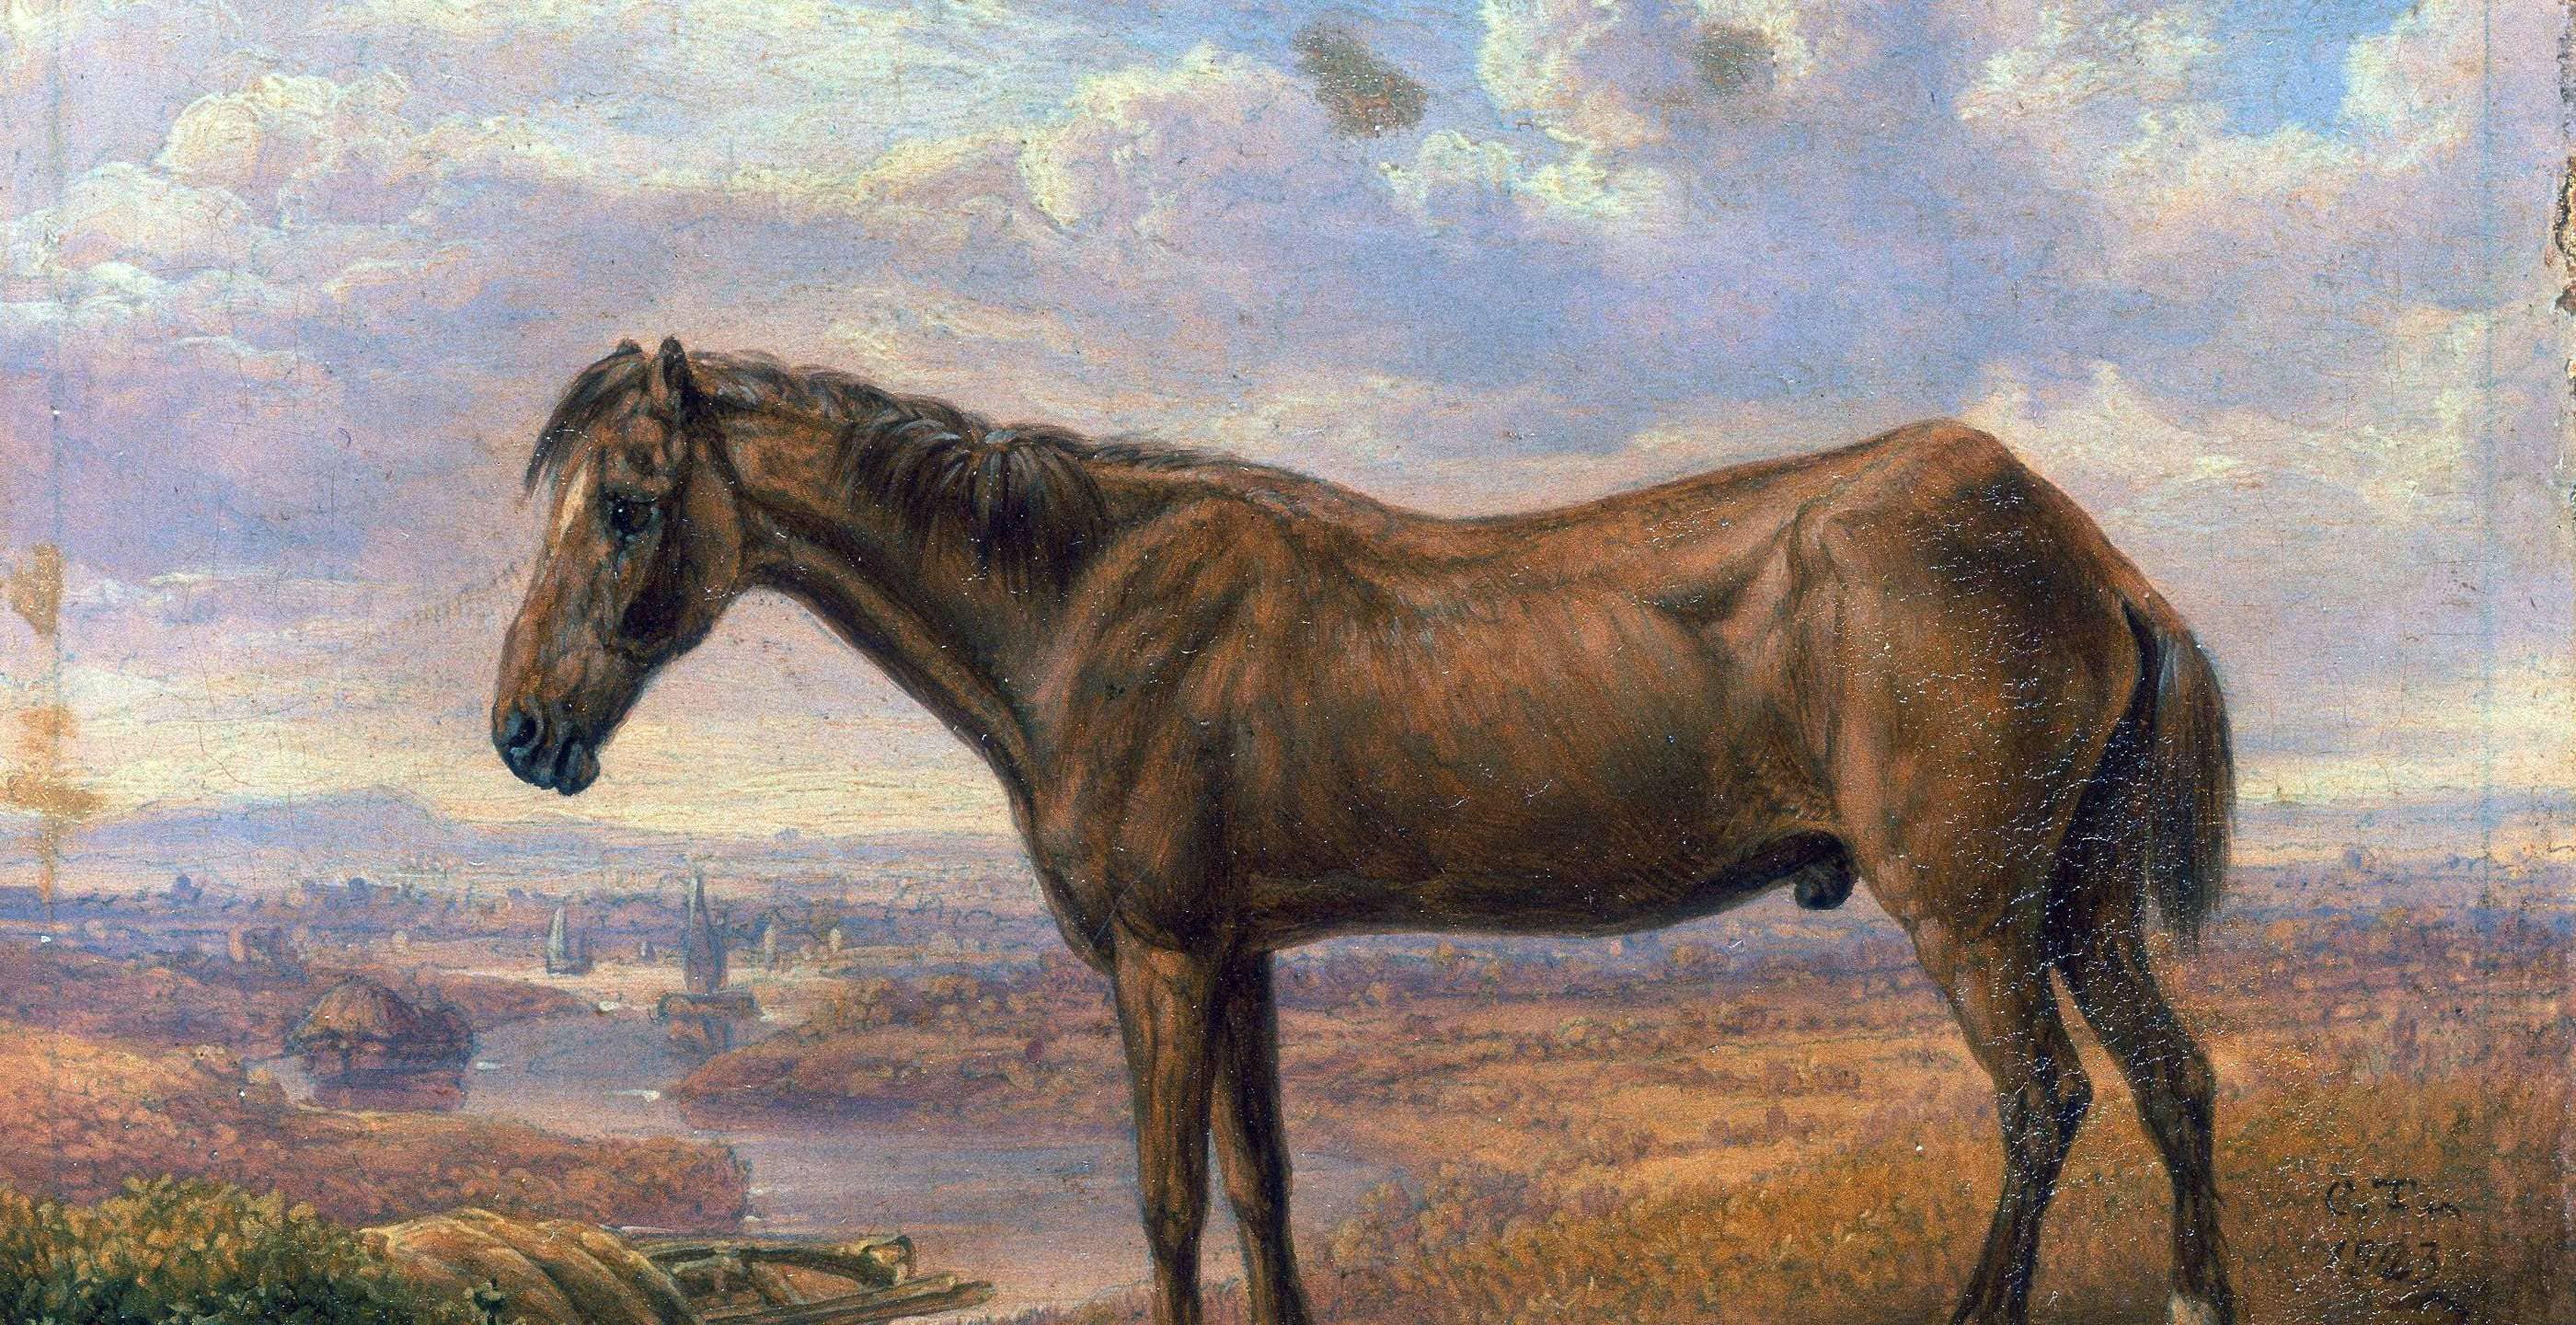 BRITISH DRAUGHT HORSES IN THE 19TH CENTURY